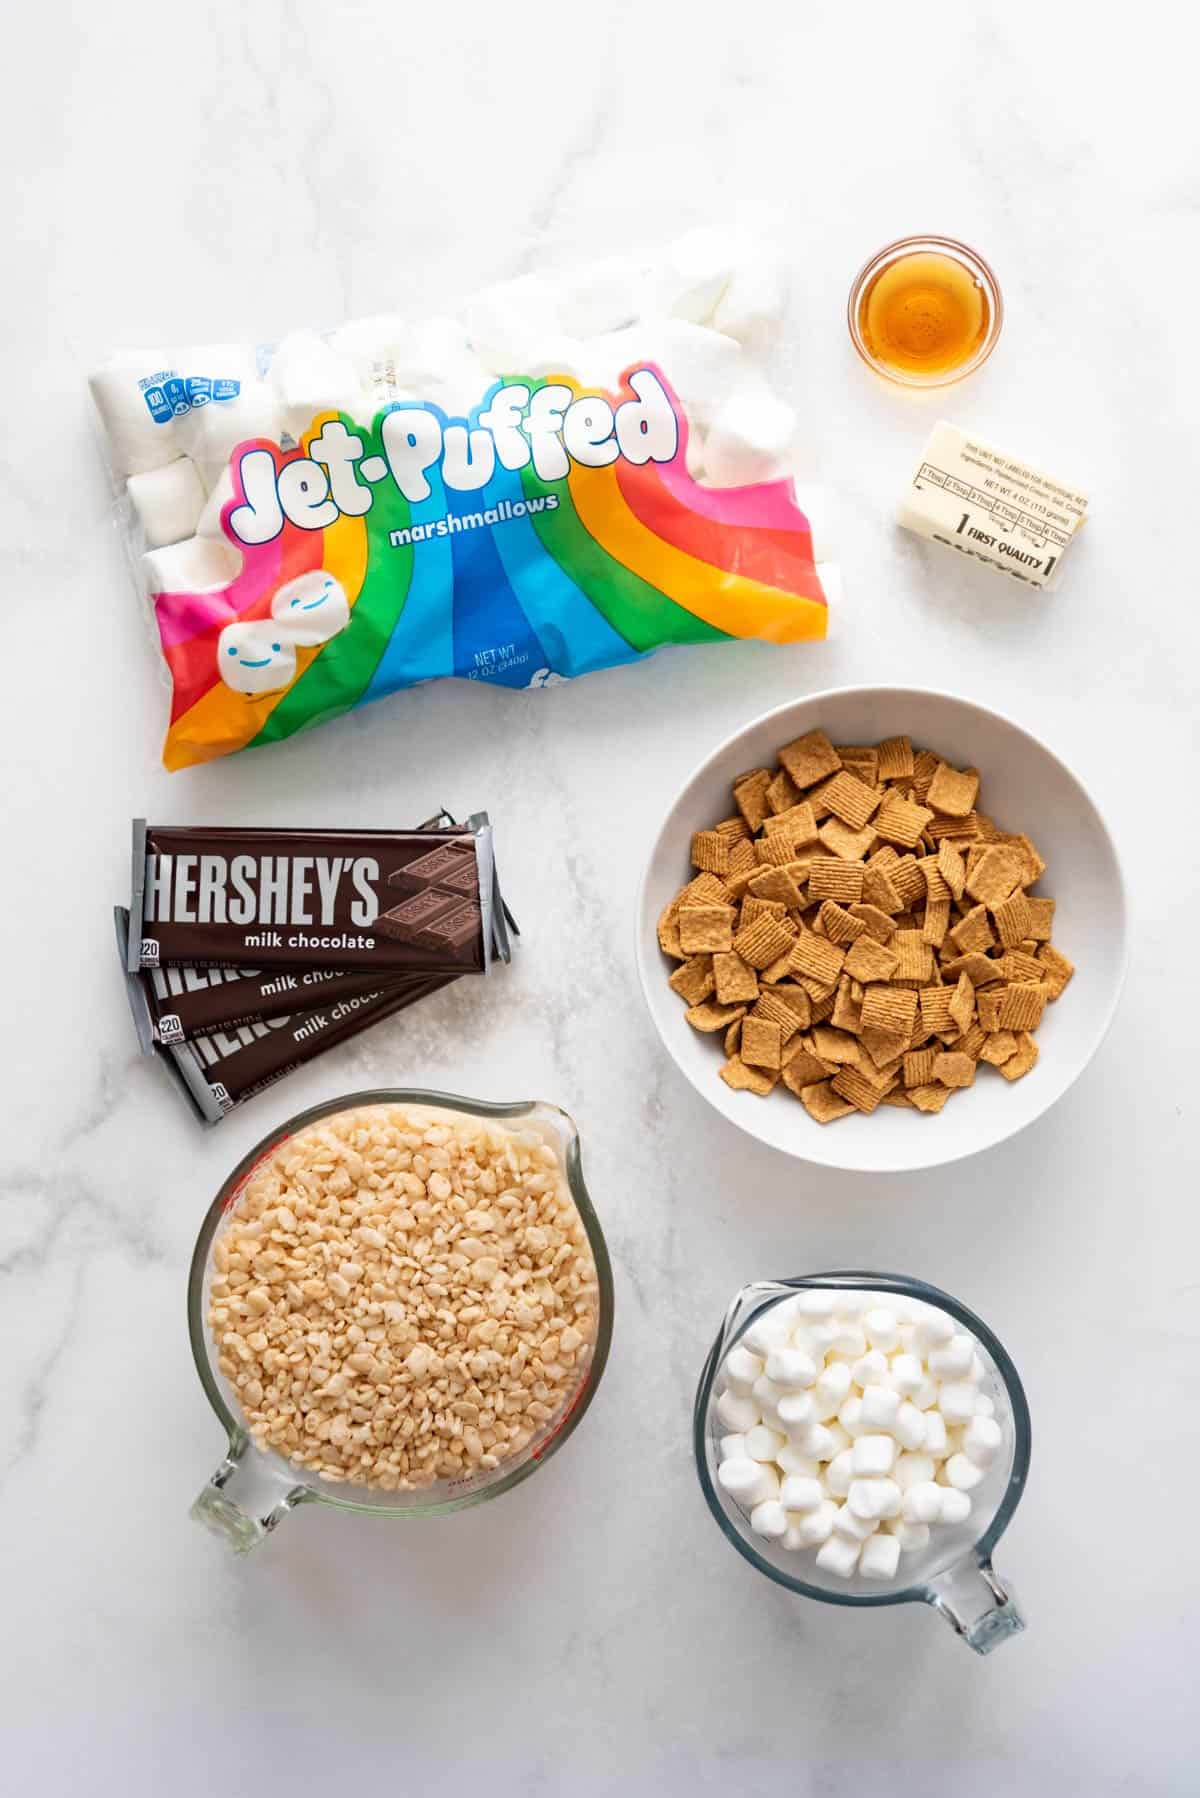 Ingredients for making s'mores rice krispies treats.